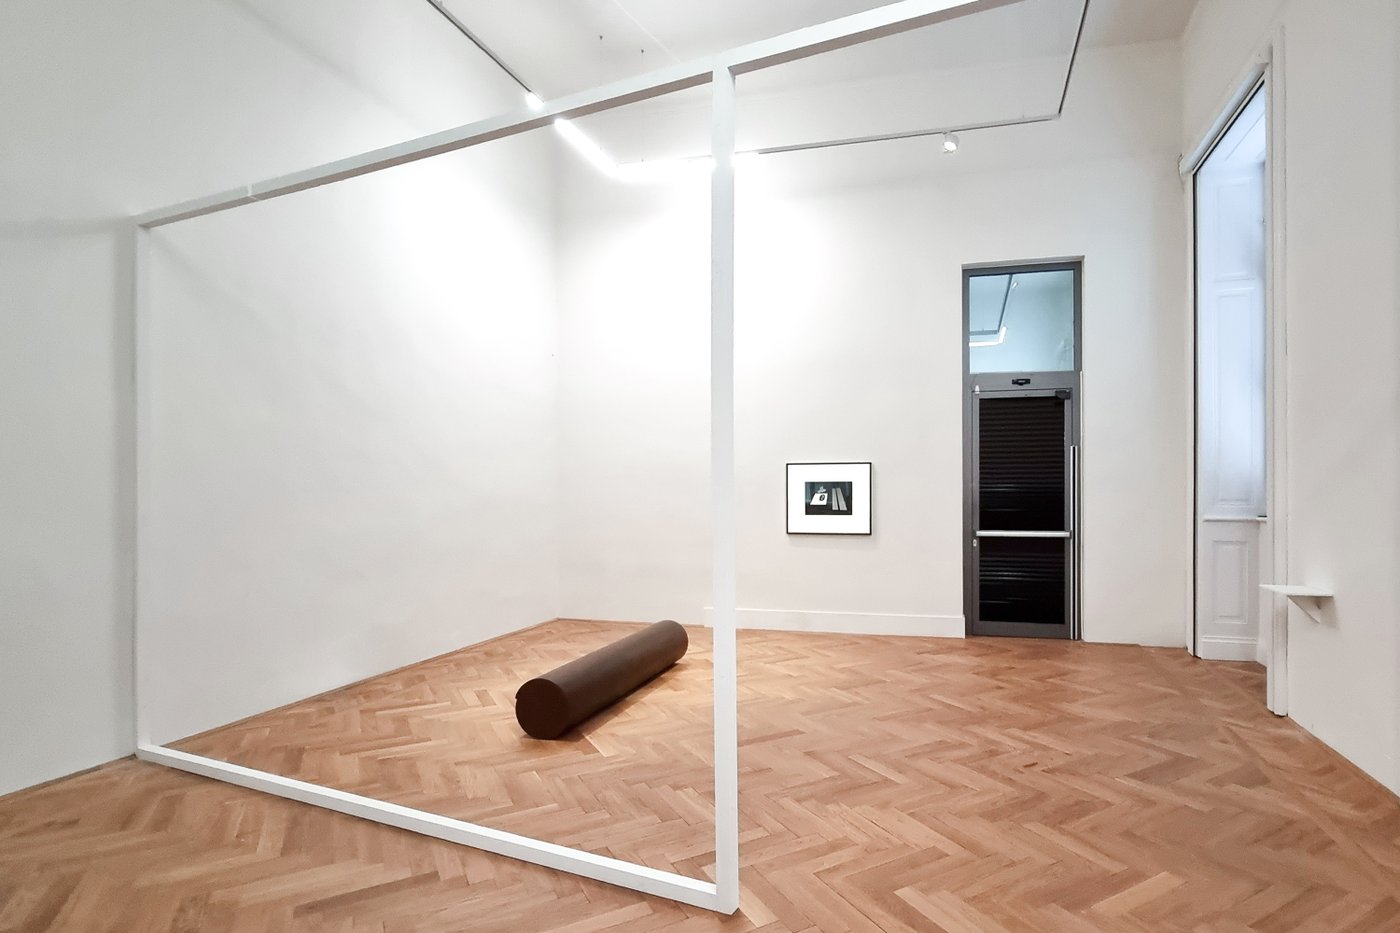 view of a room with white collumns which bild a frame, in the background a wooden roll scultpture, on the wall behind is a black and white picture and a closed door